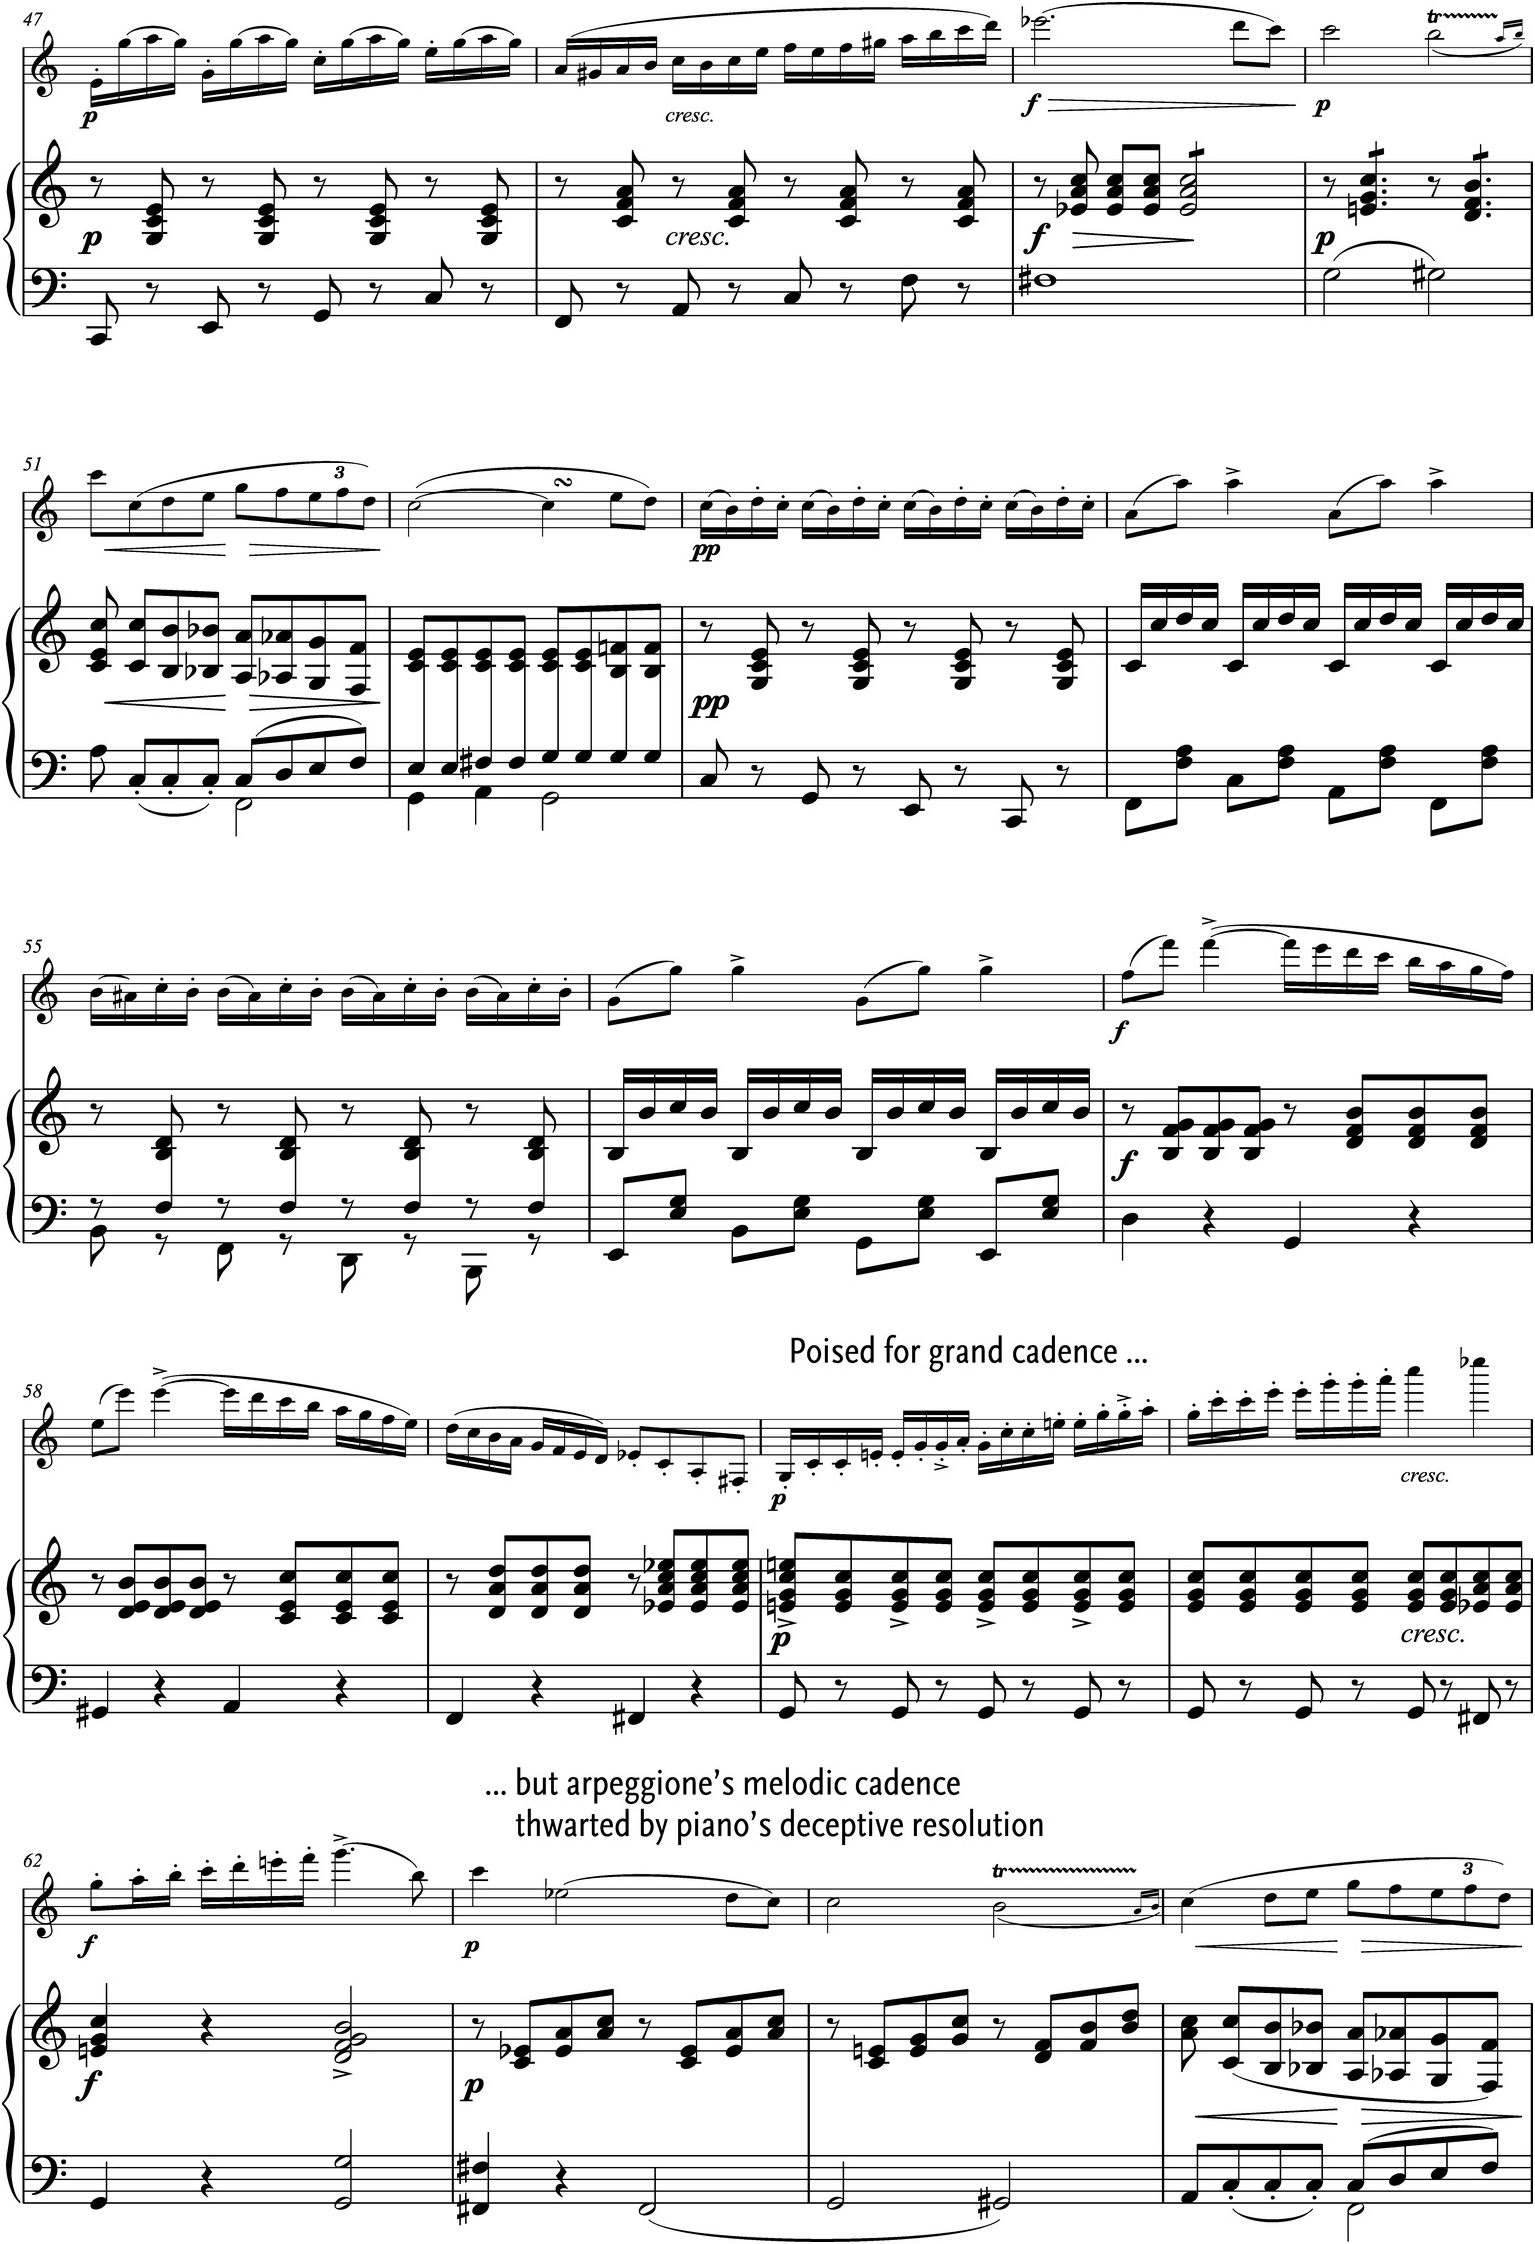 Night Shift (Transposed to D♯ Minor) Sheet music for Piano, Violin, Viola,  Cello & more instruments (Piano Sextet)